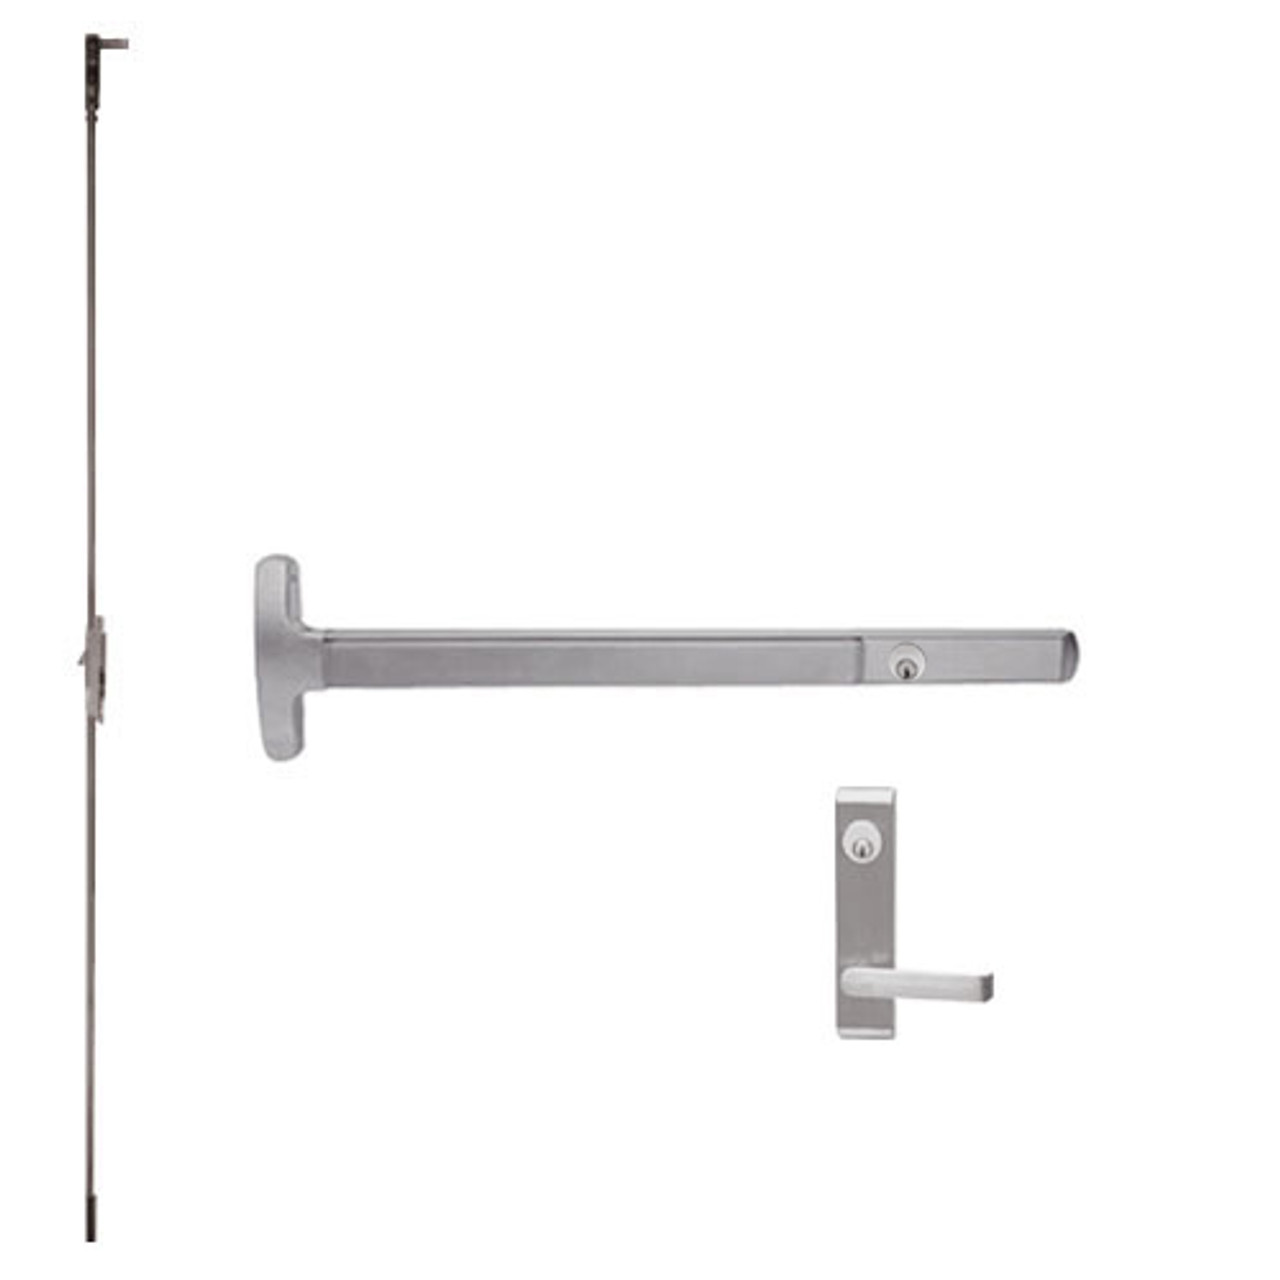 CD24-C-L-DANE-US32D-4-LHR Falcon Exit Device in Satin Stainless Steel